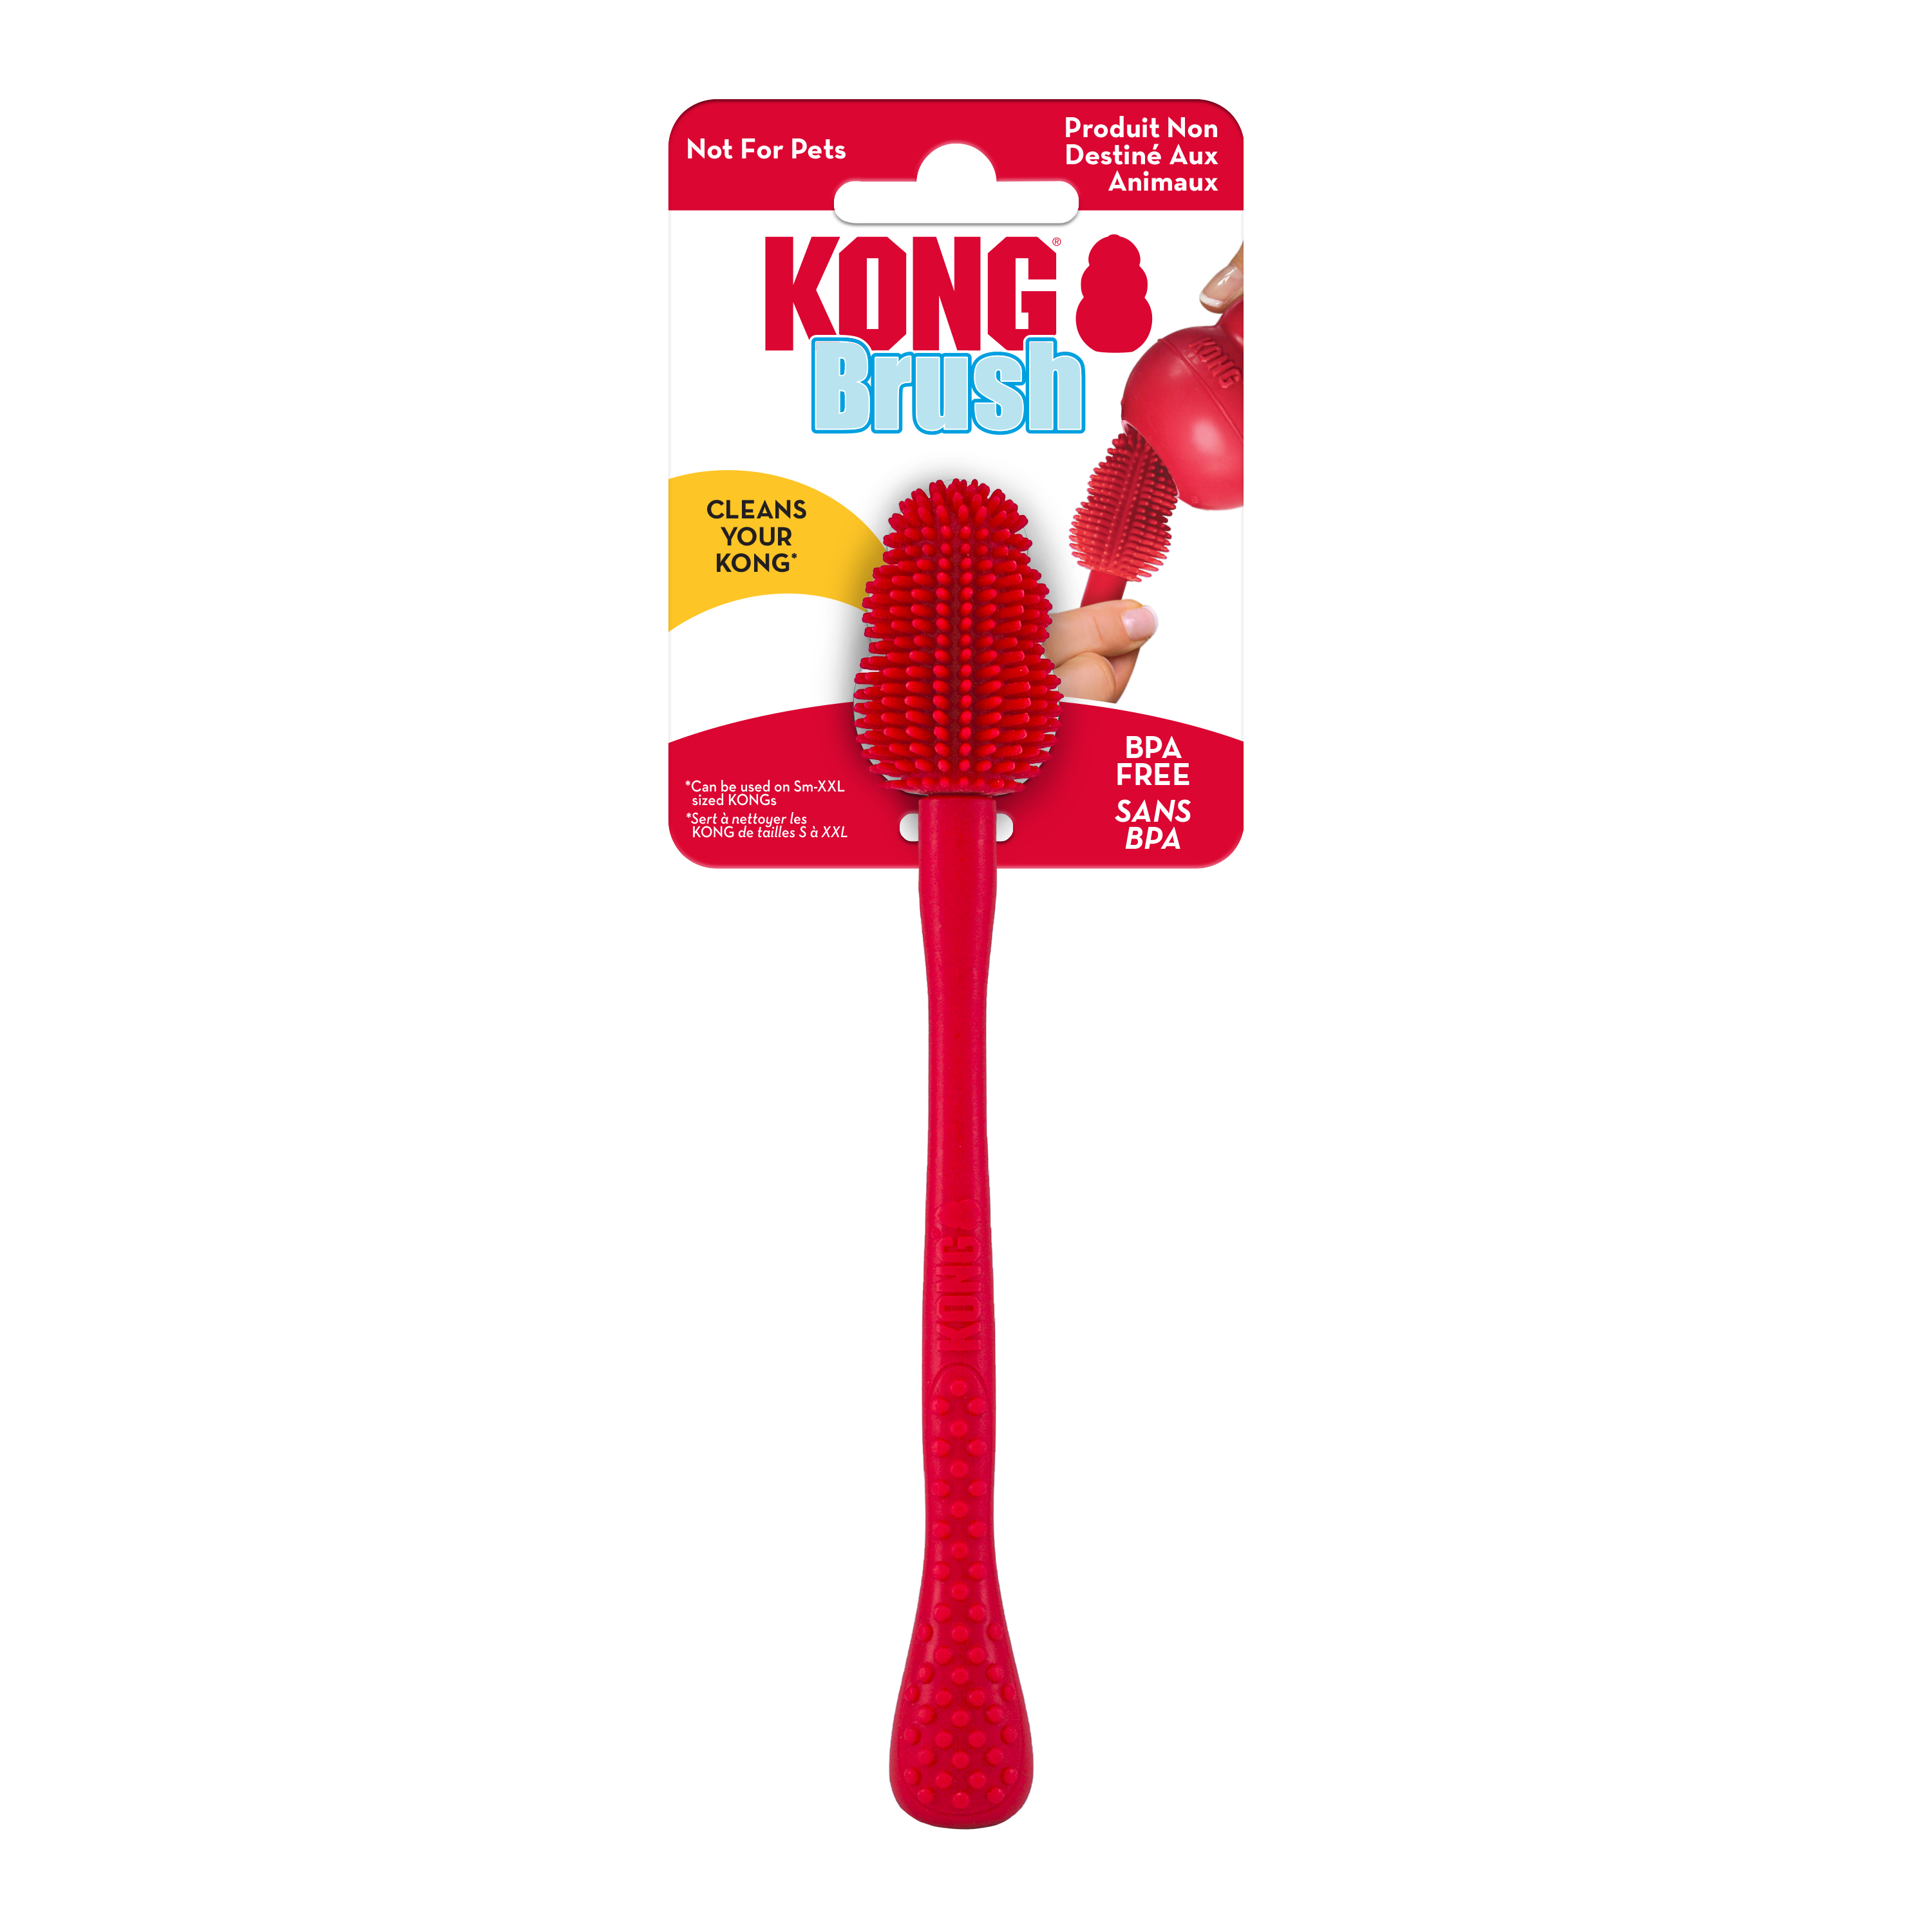 KONG – Cleaning Brush - Pets and More